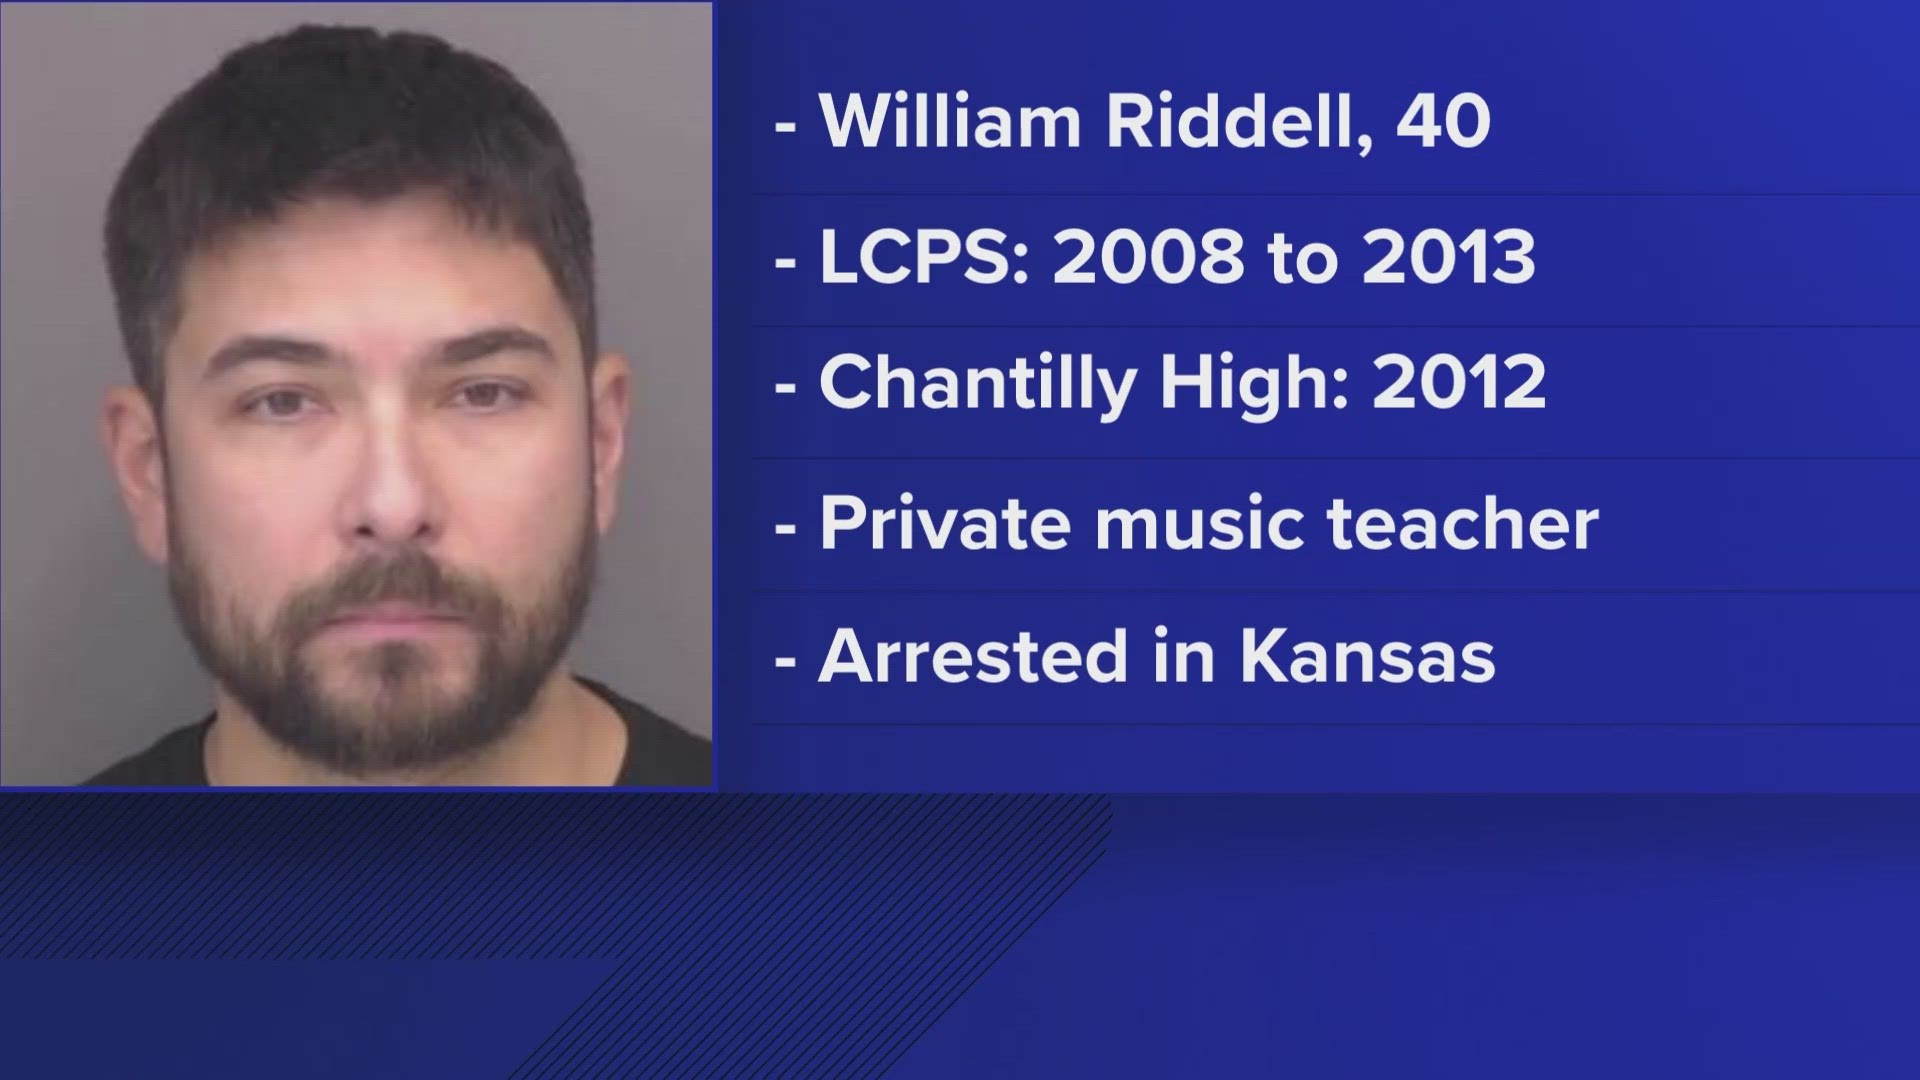 Prior to his move to Kansas, Riddell privately taught music in the Chantilly area. Loudoun County Public Schools also employed him between 2008 and 2013.